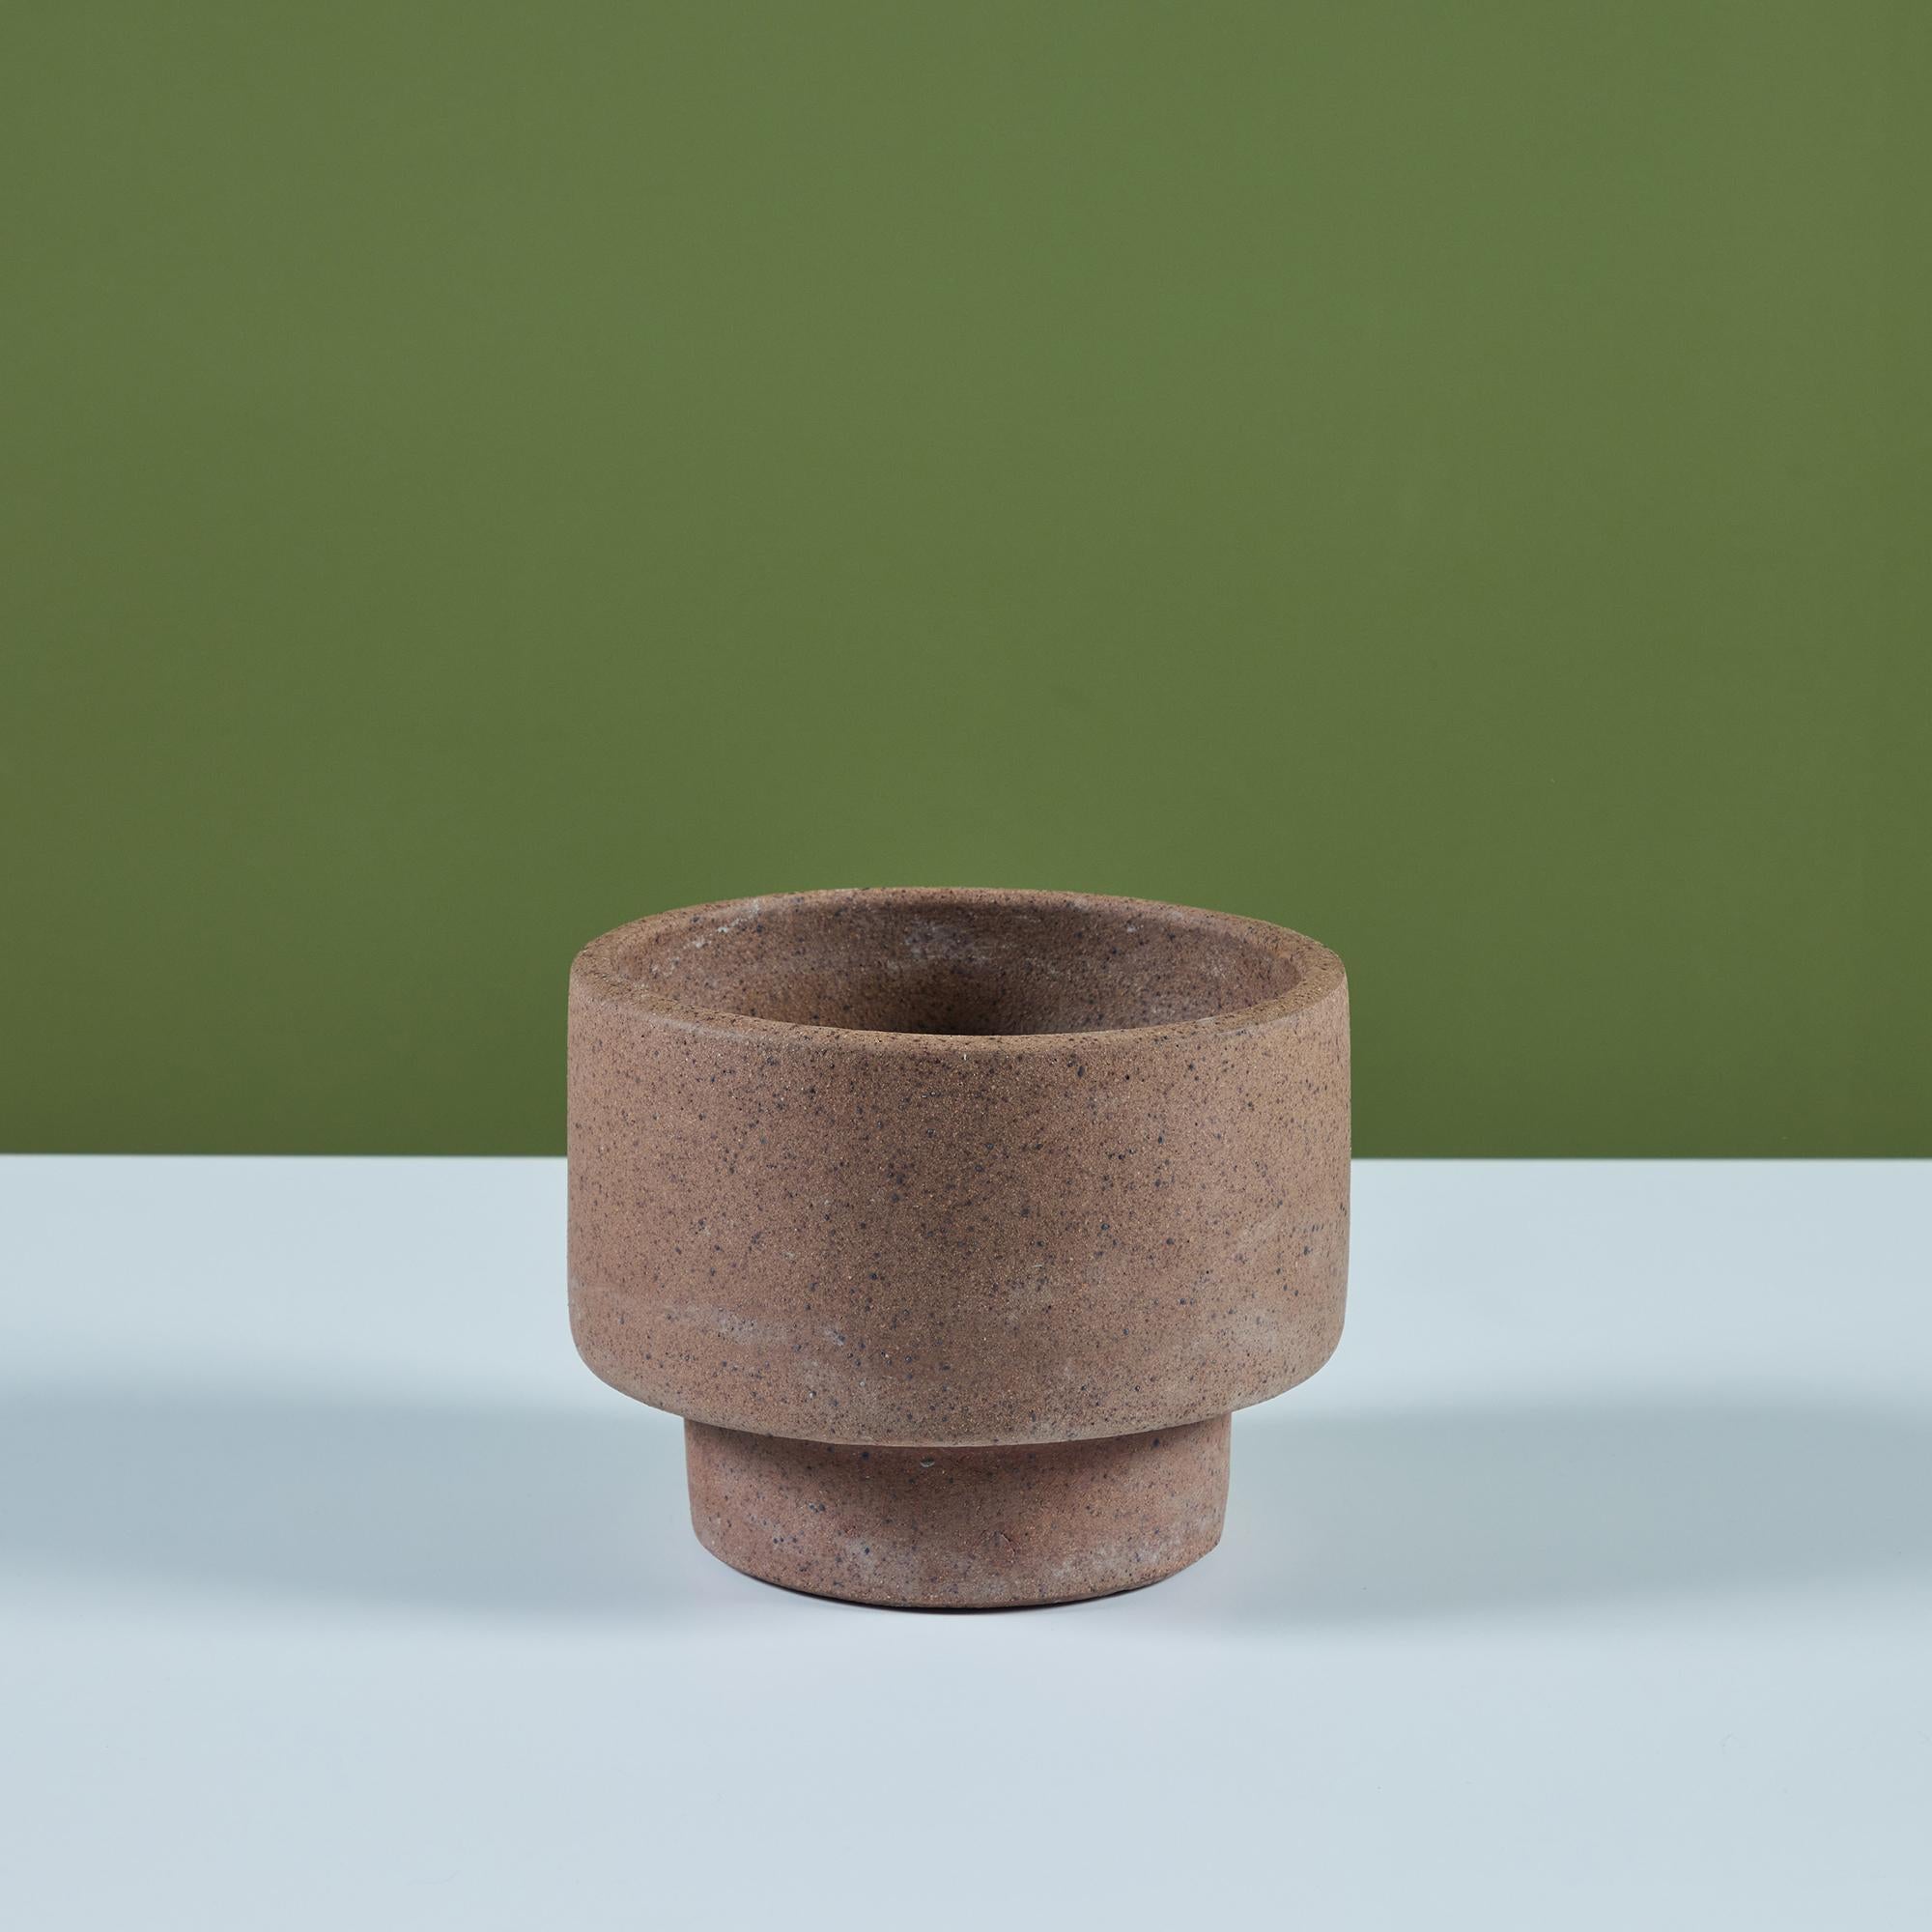 David Cressey Pro/Artisan collection planter for Architectural Pottery. This stoneware planter has an unglazed natural warm brown clay interior and exterior.  The petite table planter has a large cylindrical body and tapers to a slightly smaller